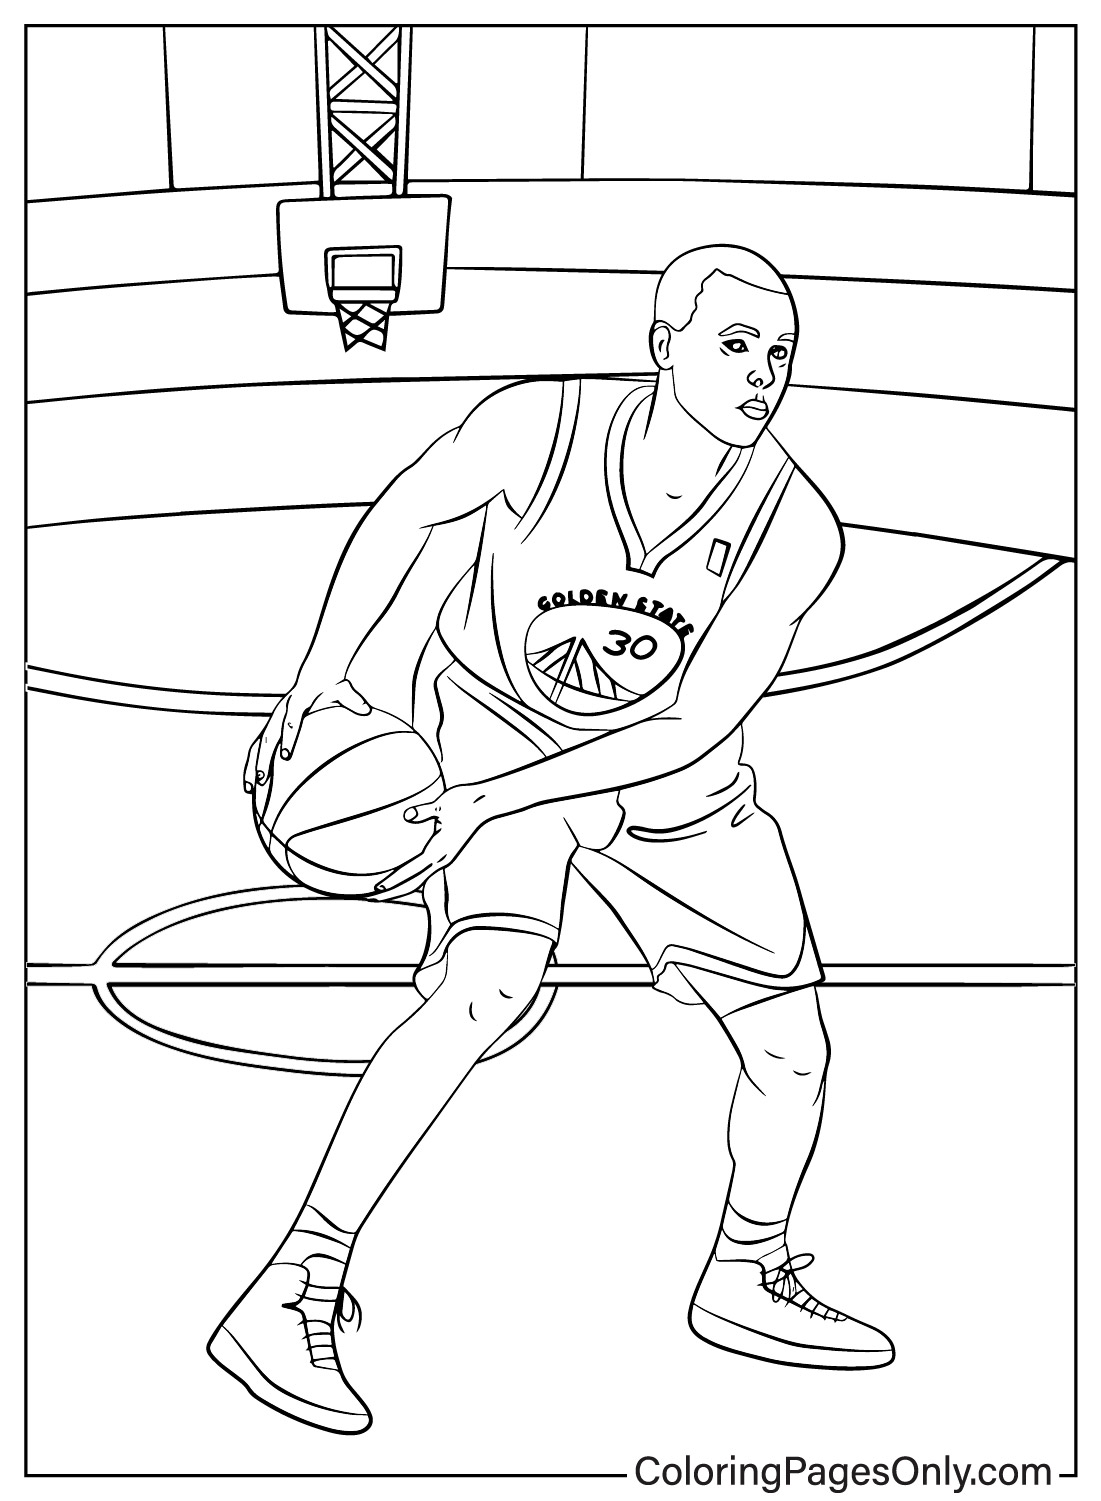 Coloring pages only on x ð stephen curry coloring pages collection httpstcovnjkcrtrh stephencurry people coloringpagesonly coloringpages coloringbook art fanart sketch drawing draw coloring usa trend trending trendingnow